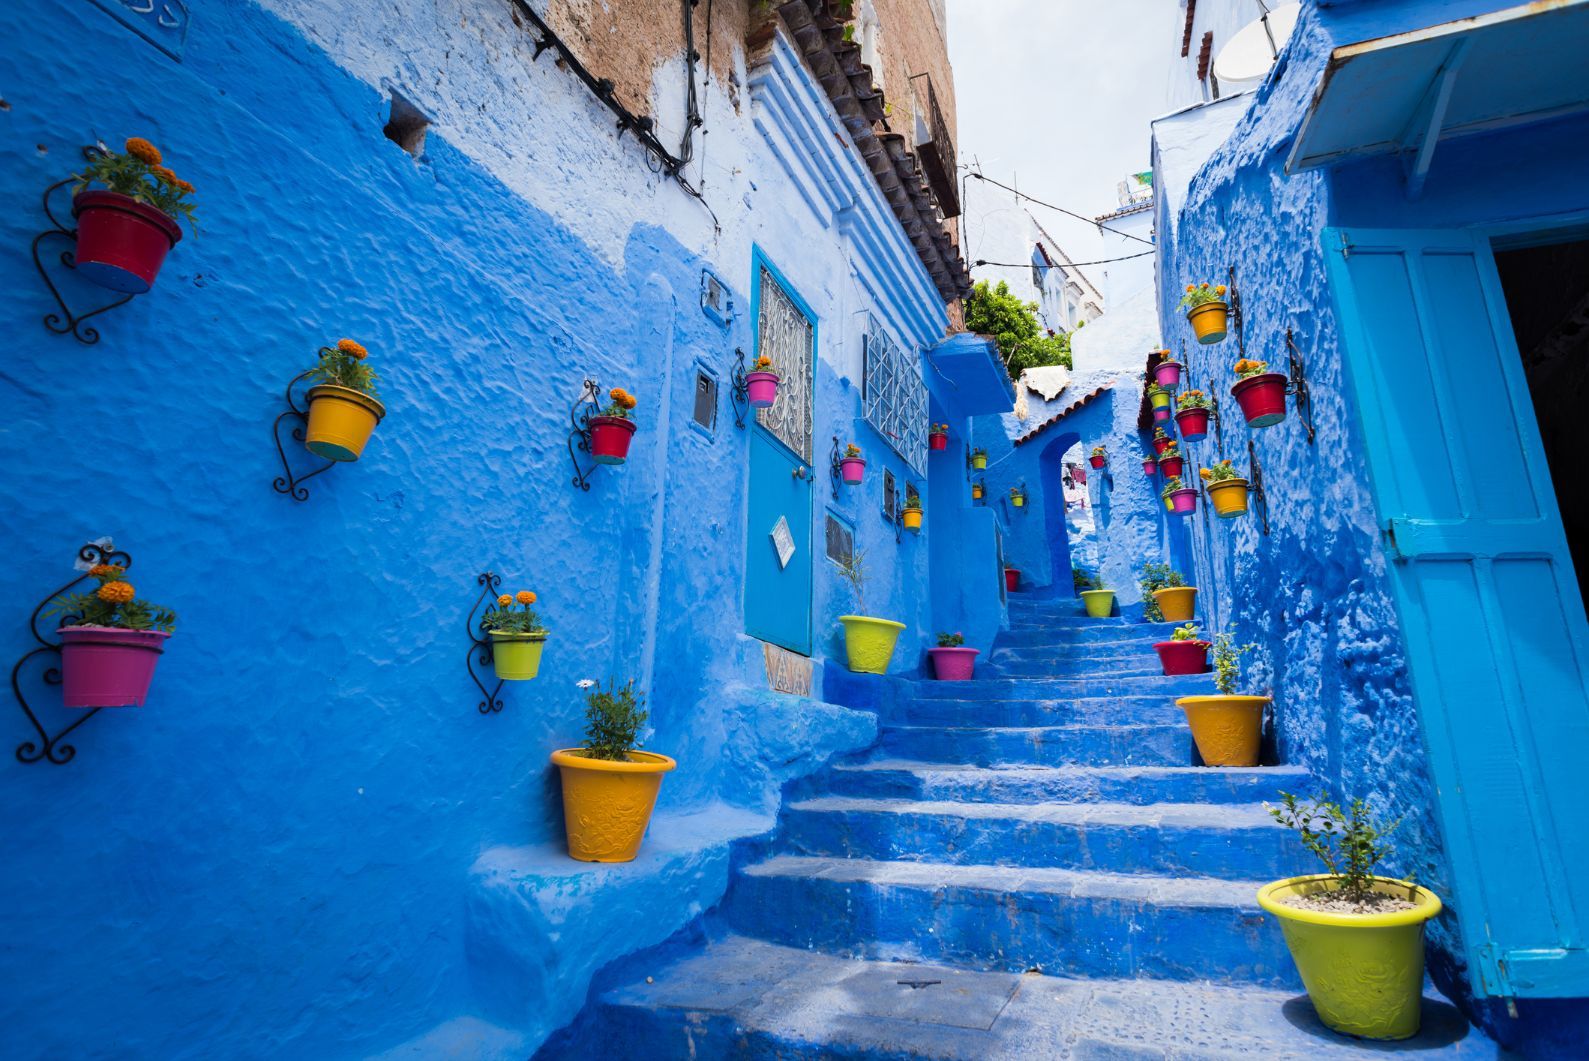 A blue passageway through the old town of Chefchaouen, brightened up with flower pots. Photo: Getty